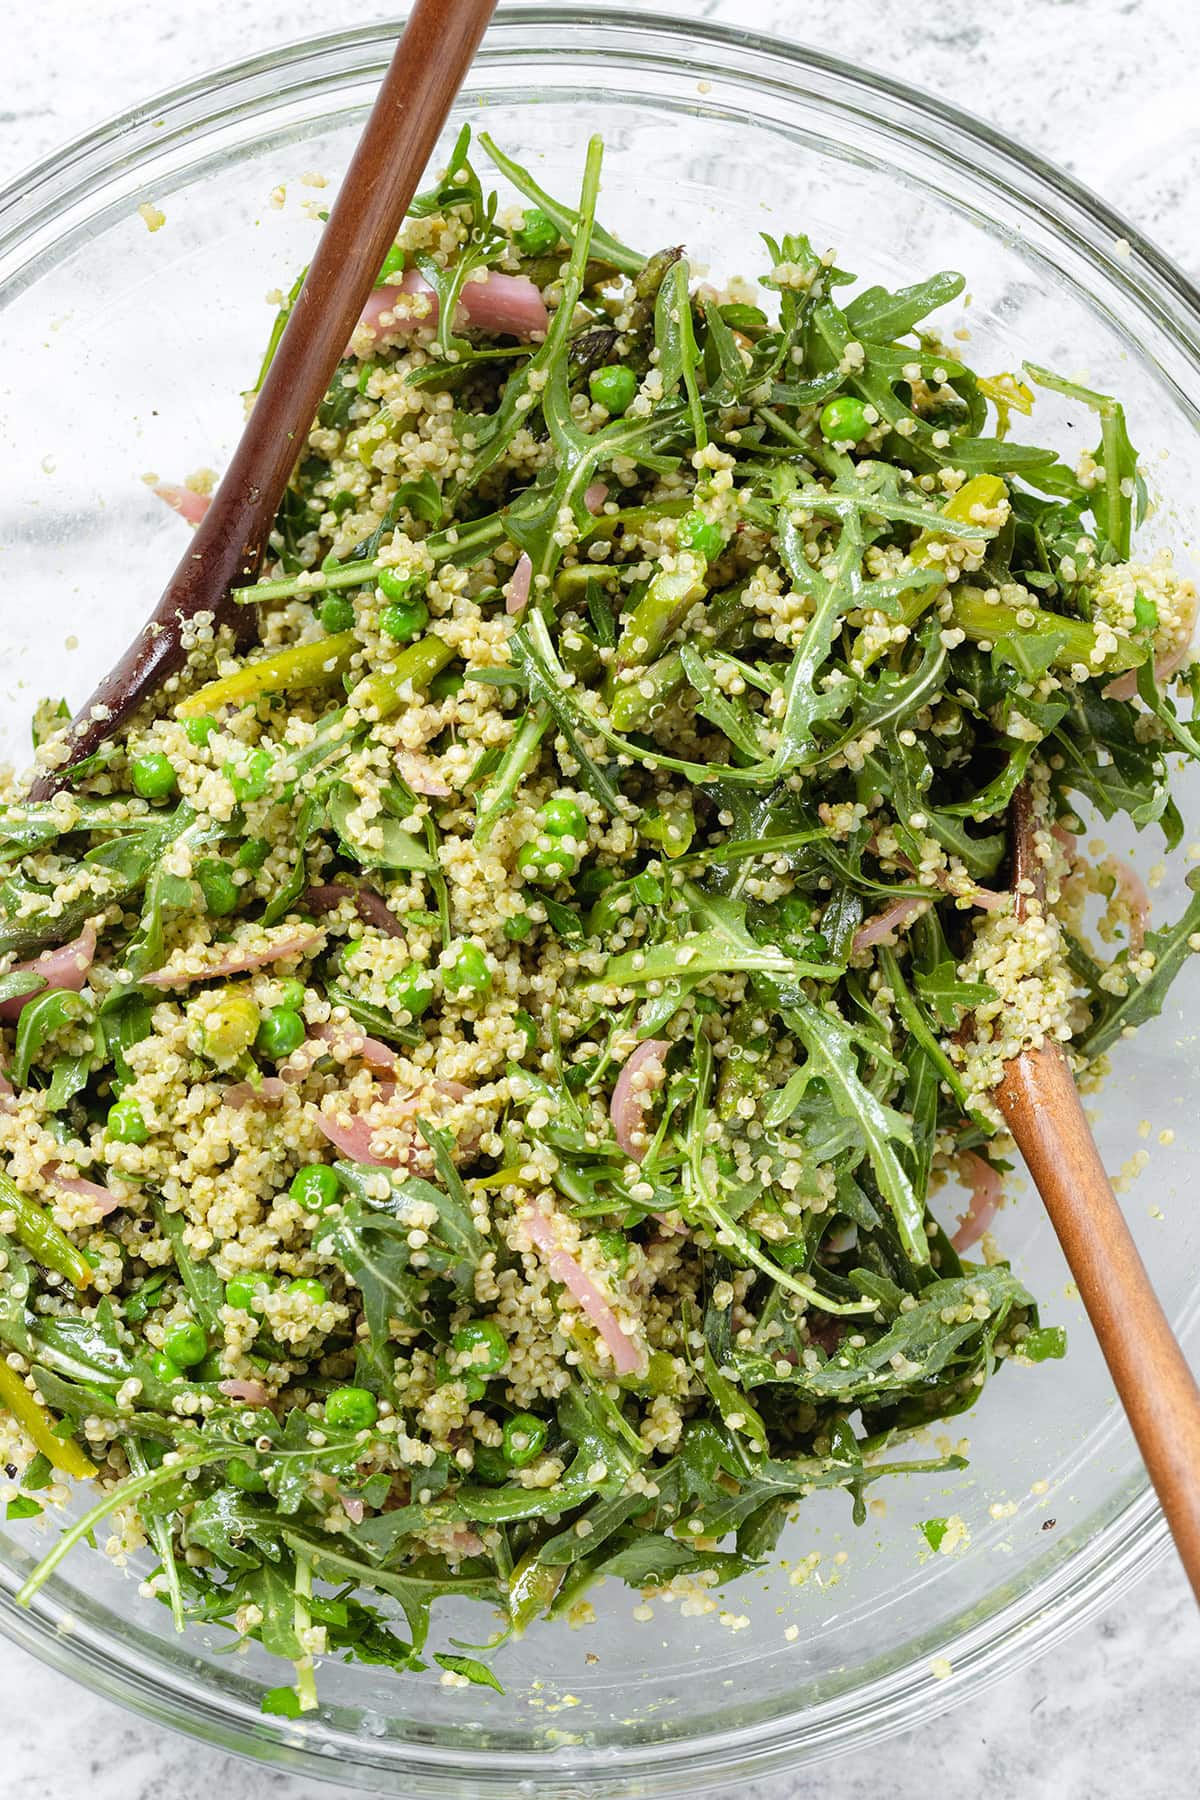 Asparagus quinoa salad in a large glass bowl with wooden mixing spoons.